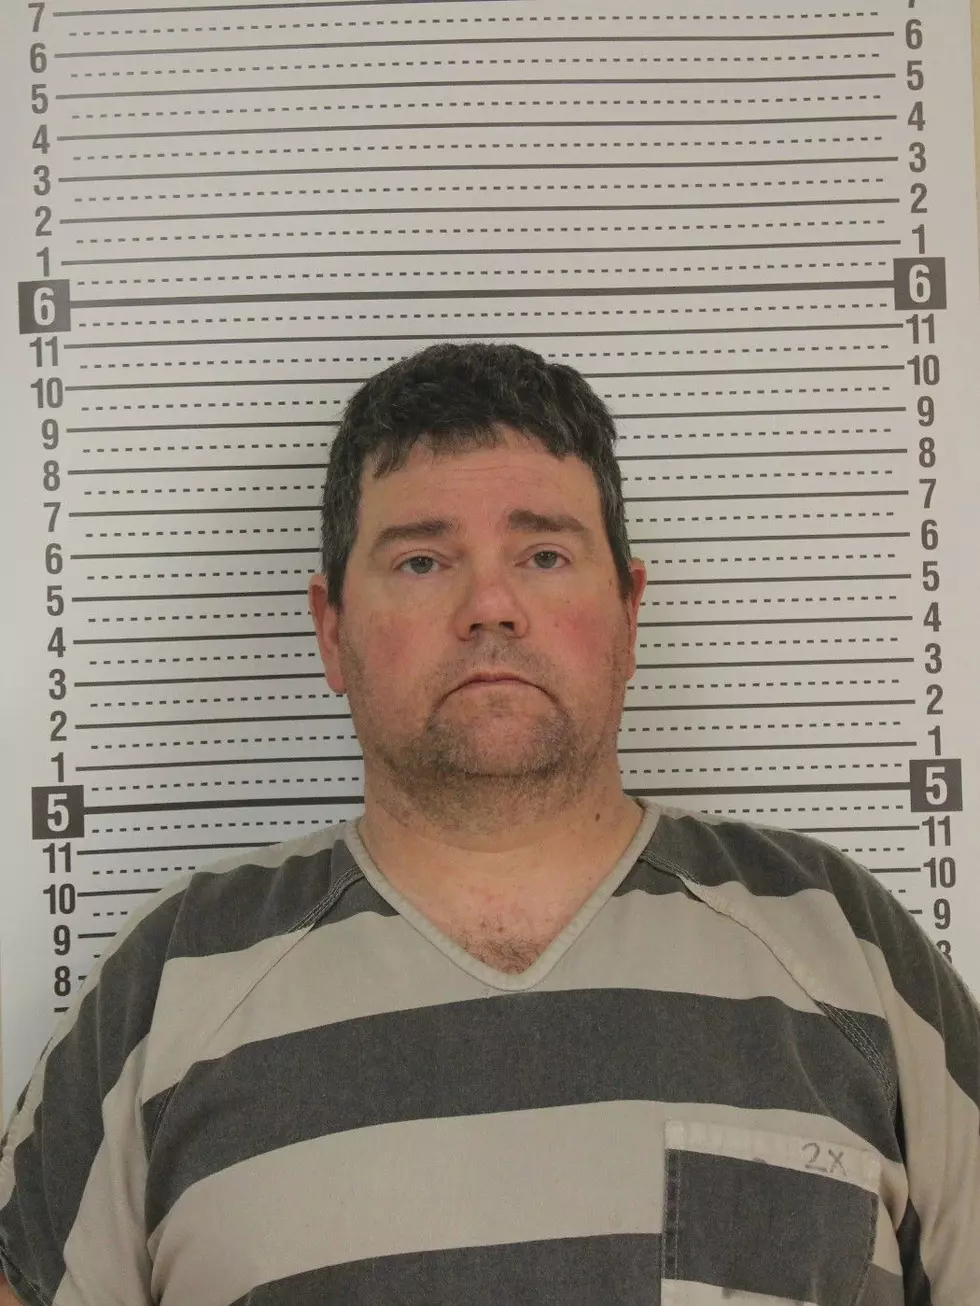 Williams County Sheriff’s Office Arrests Adult Male For Possession Of Child Pornography